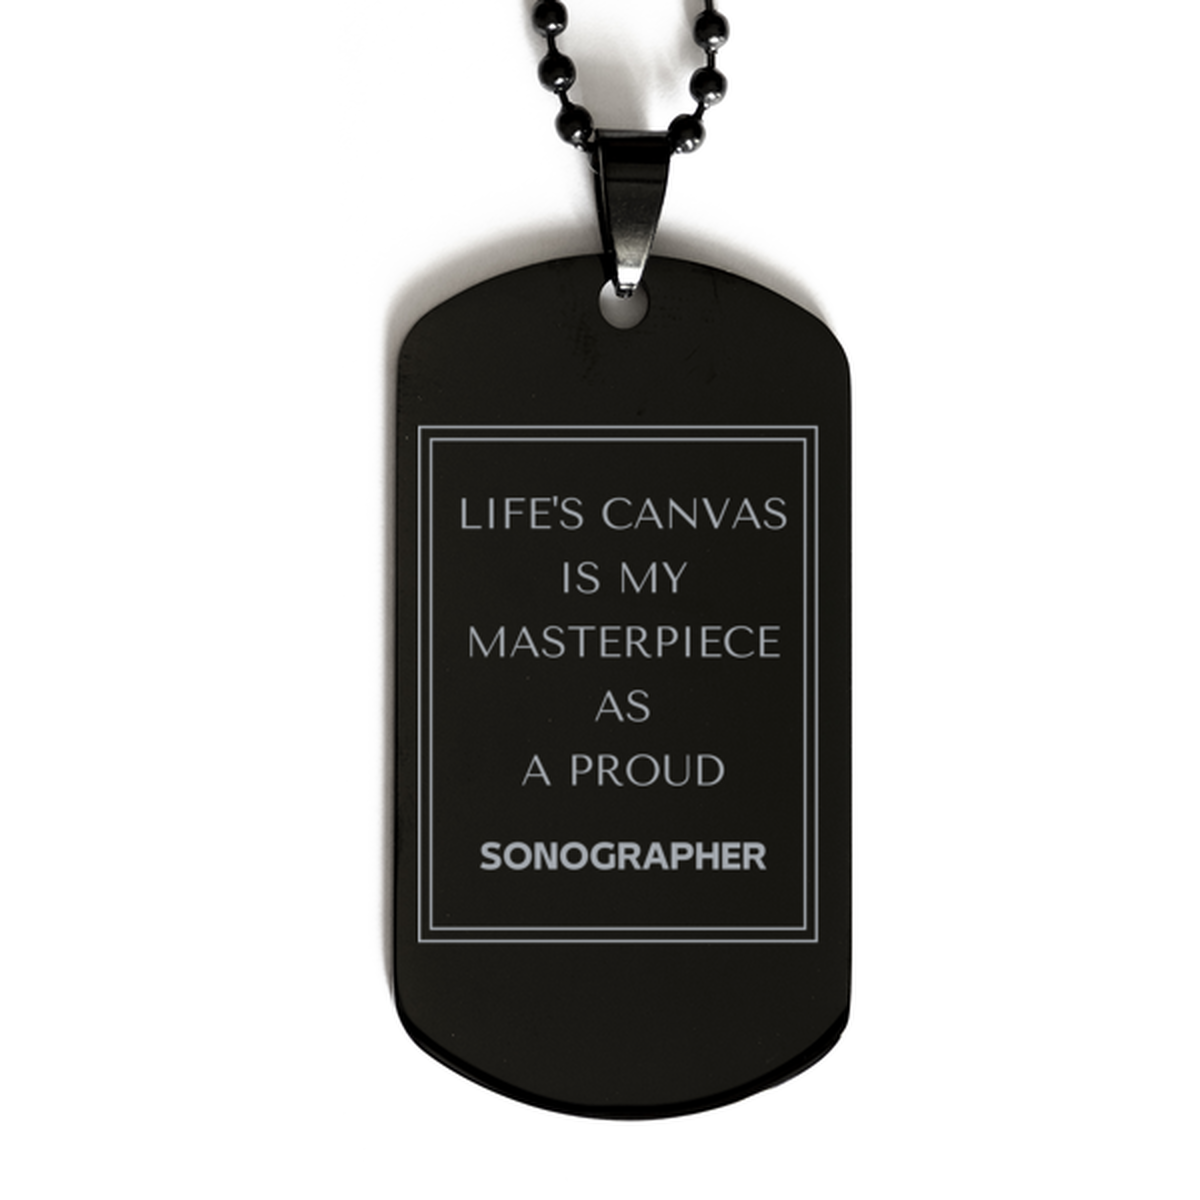 Proud Sonographer Gifts, Life's canvas is my masterpiece, Epic Birthday Christmas Unique Black Dog Tag For Sonographer, Coworkers, Men, Women, Friends